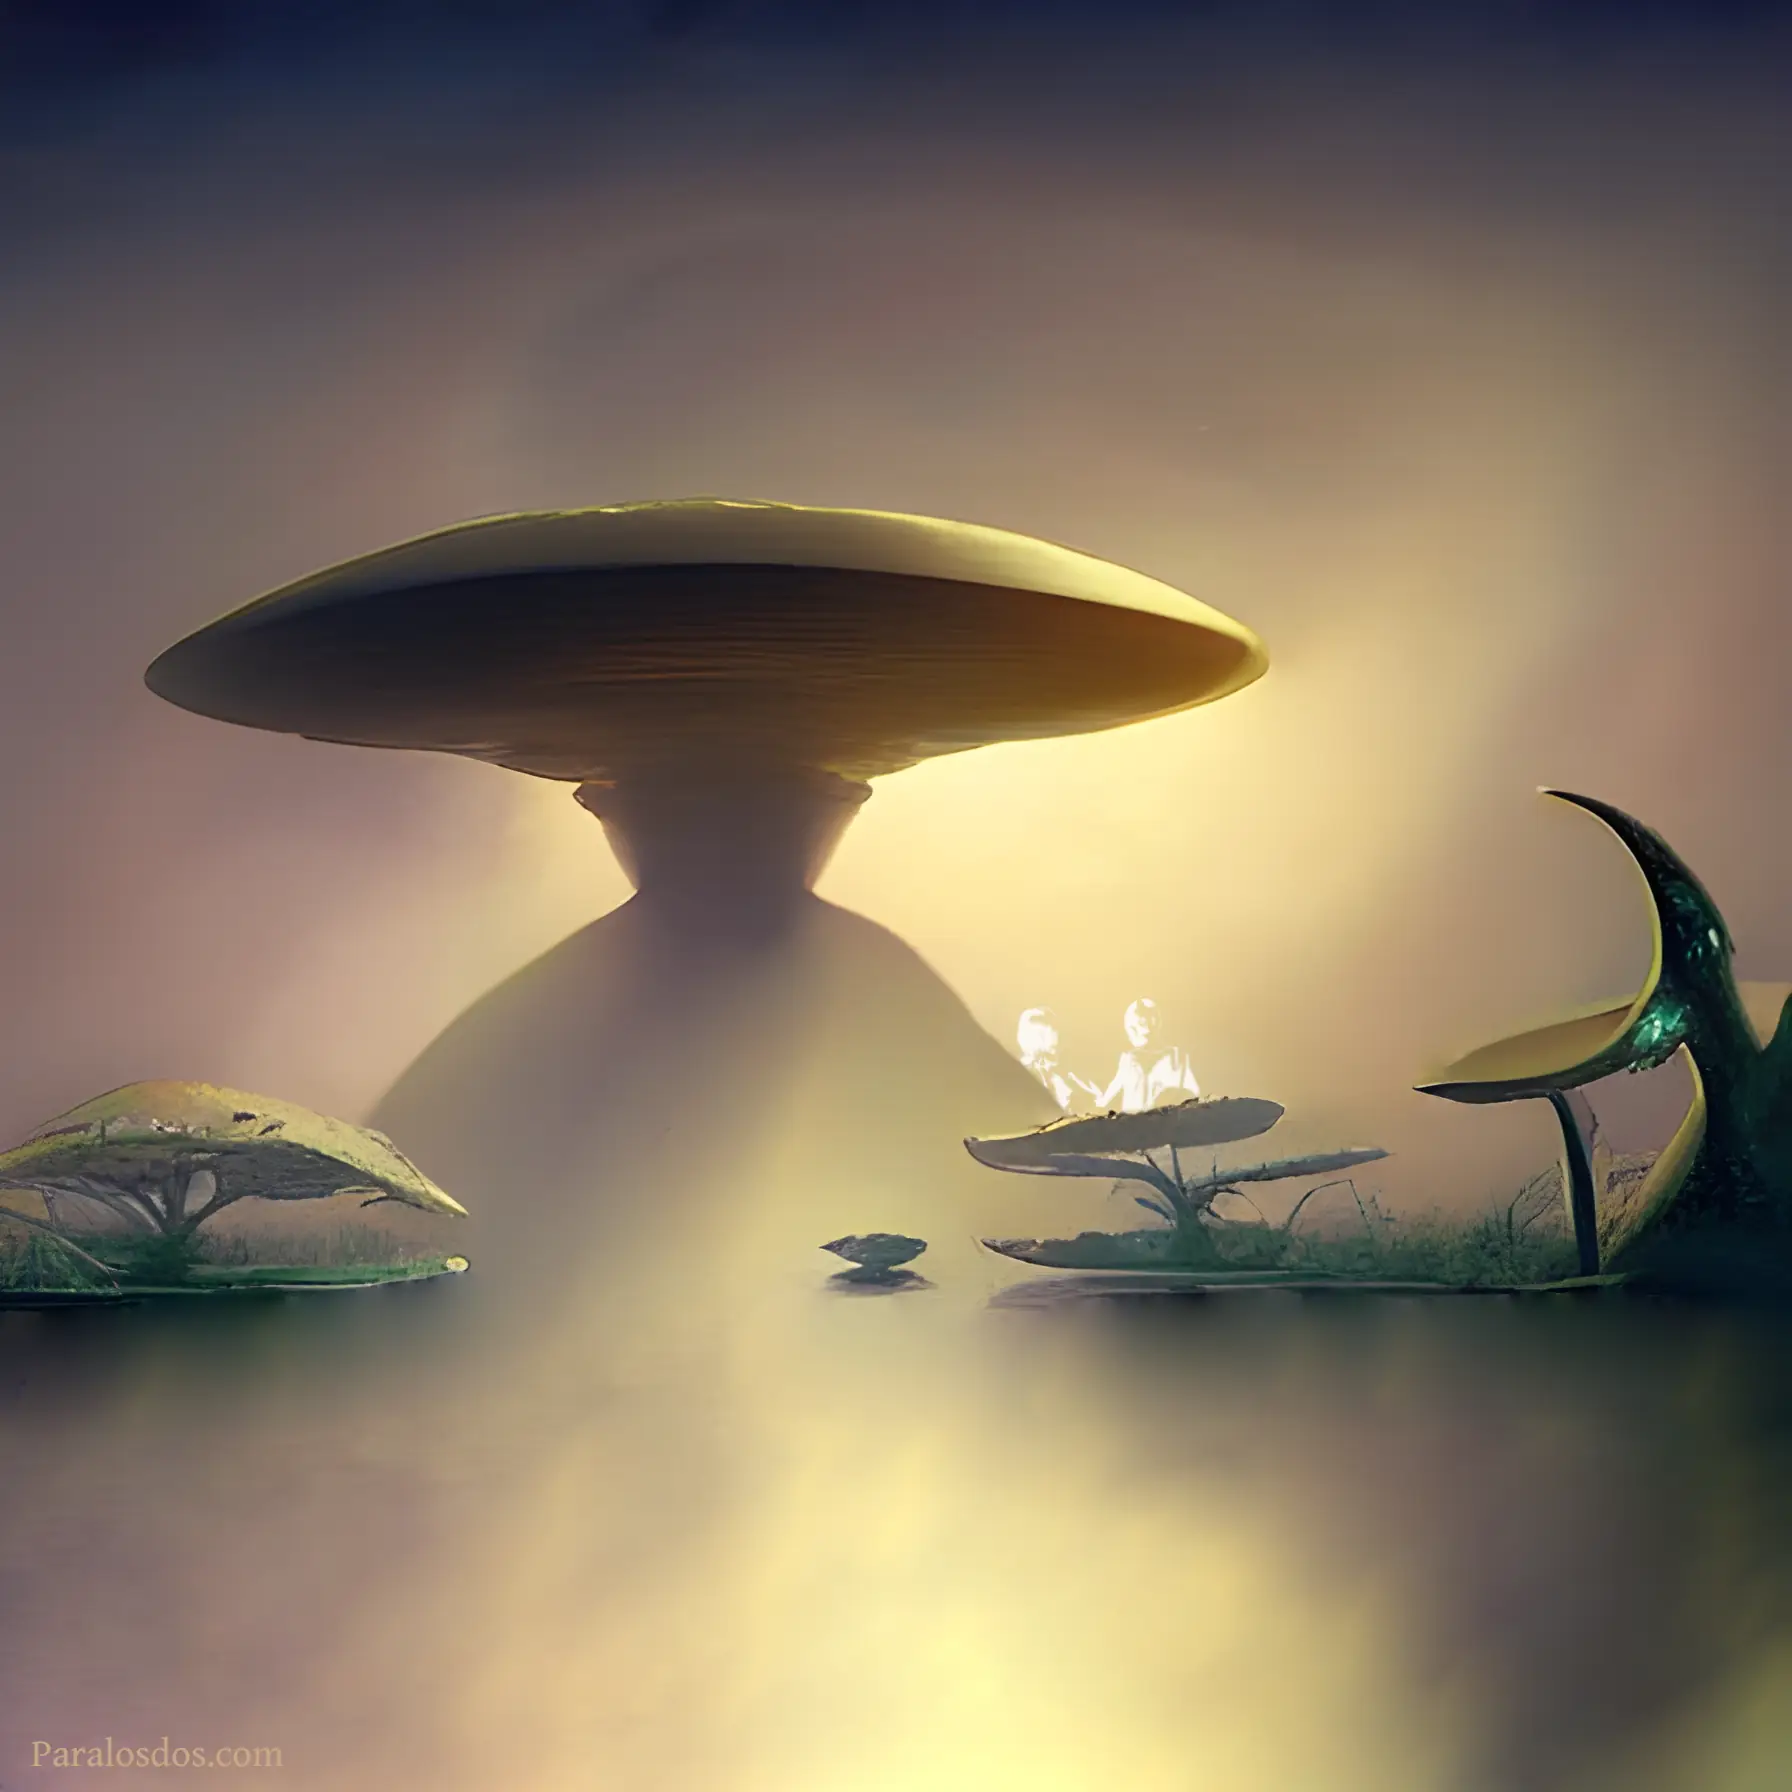 A fantastical artistic rendering of an alien structure rising out of a mystical lake.